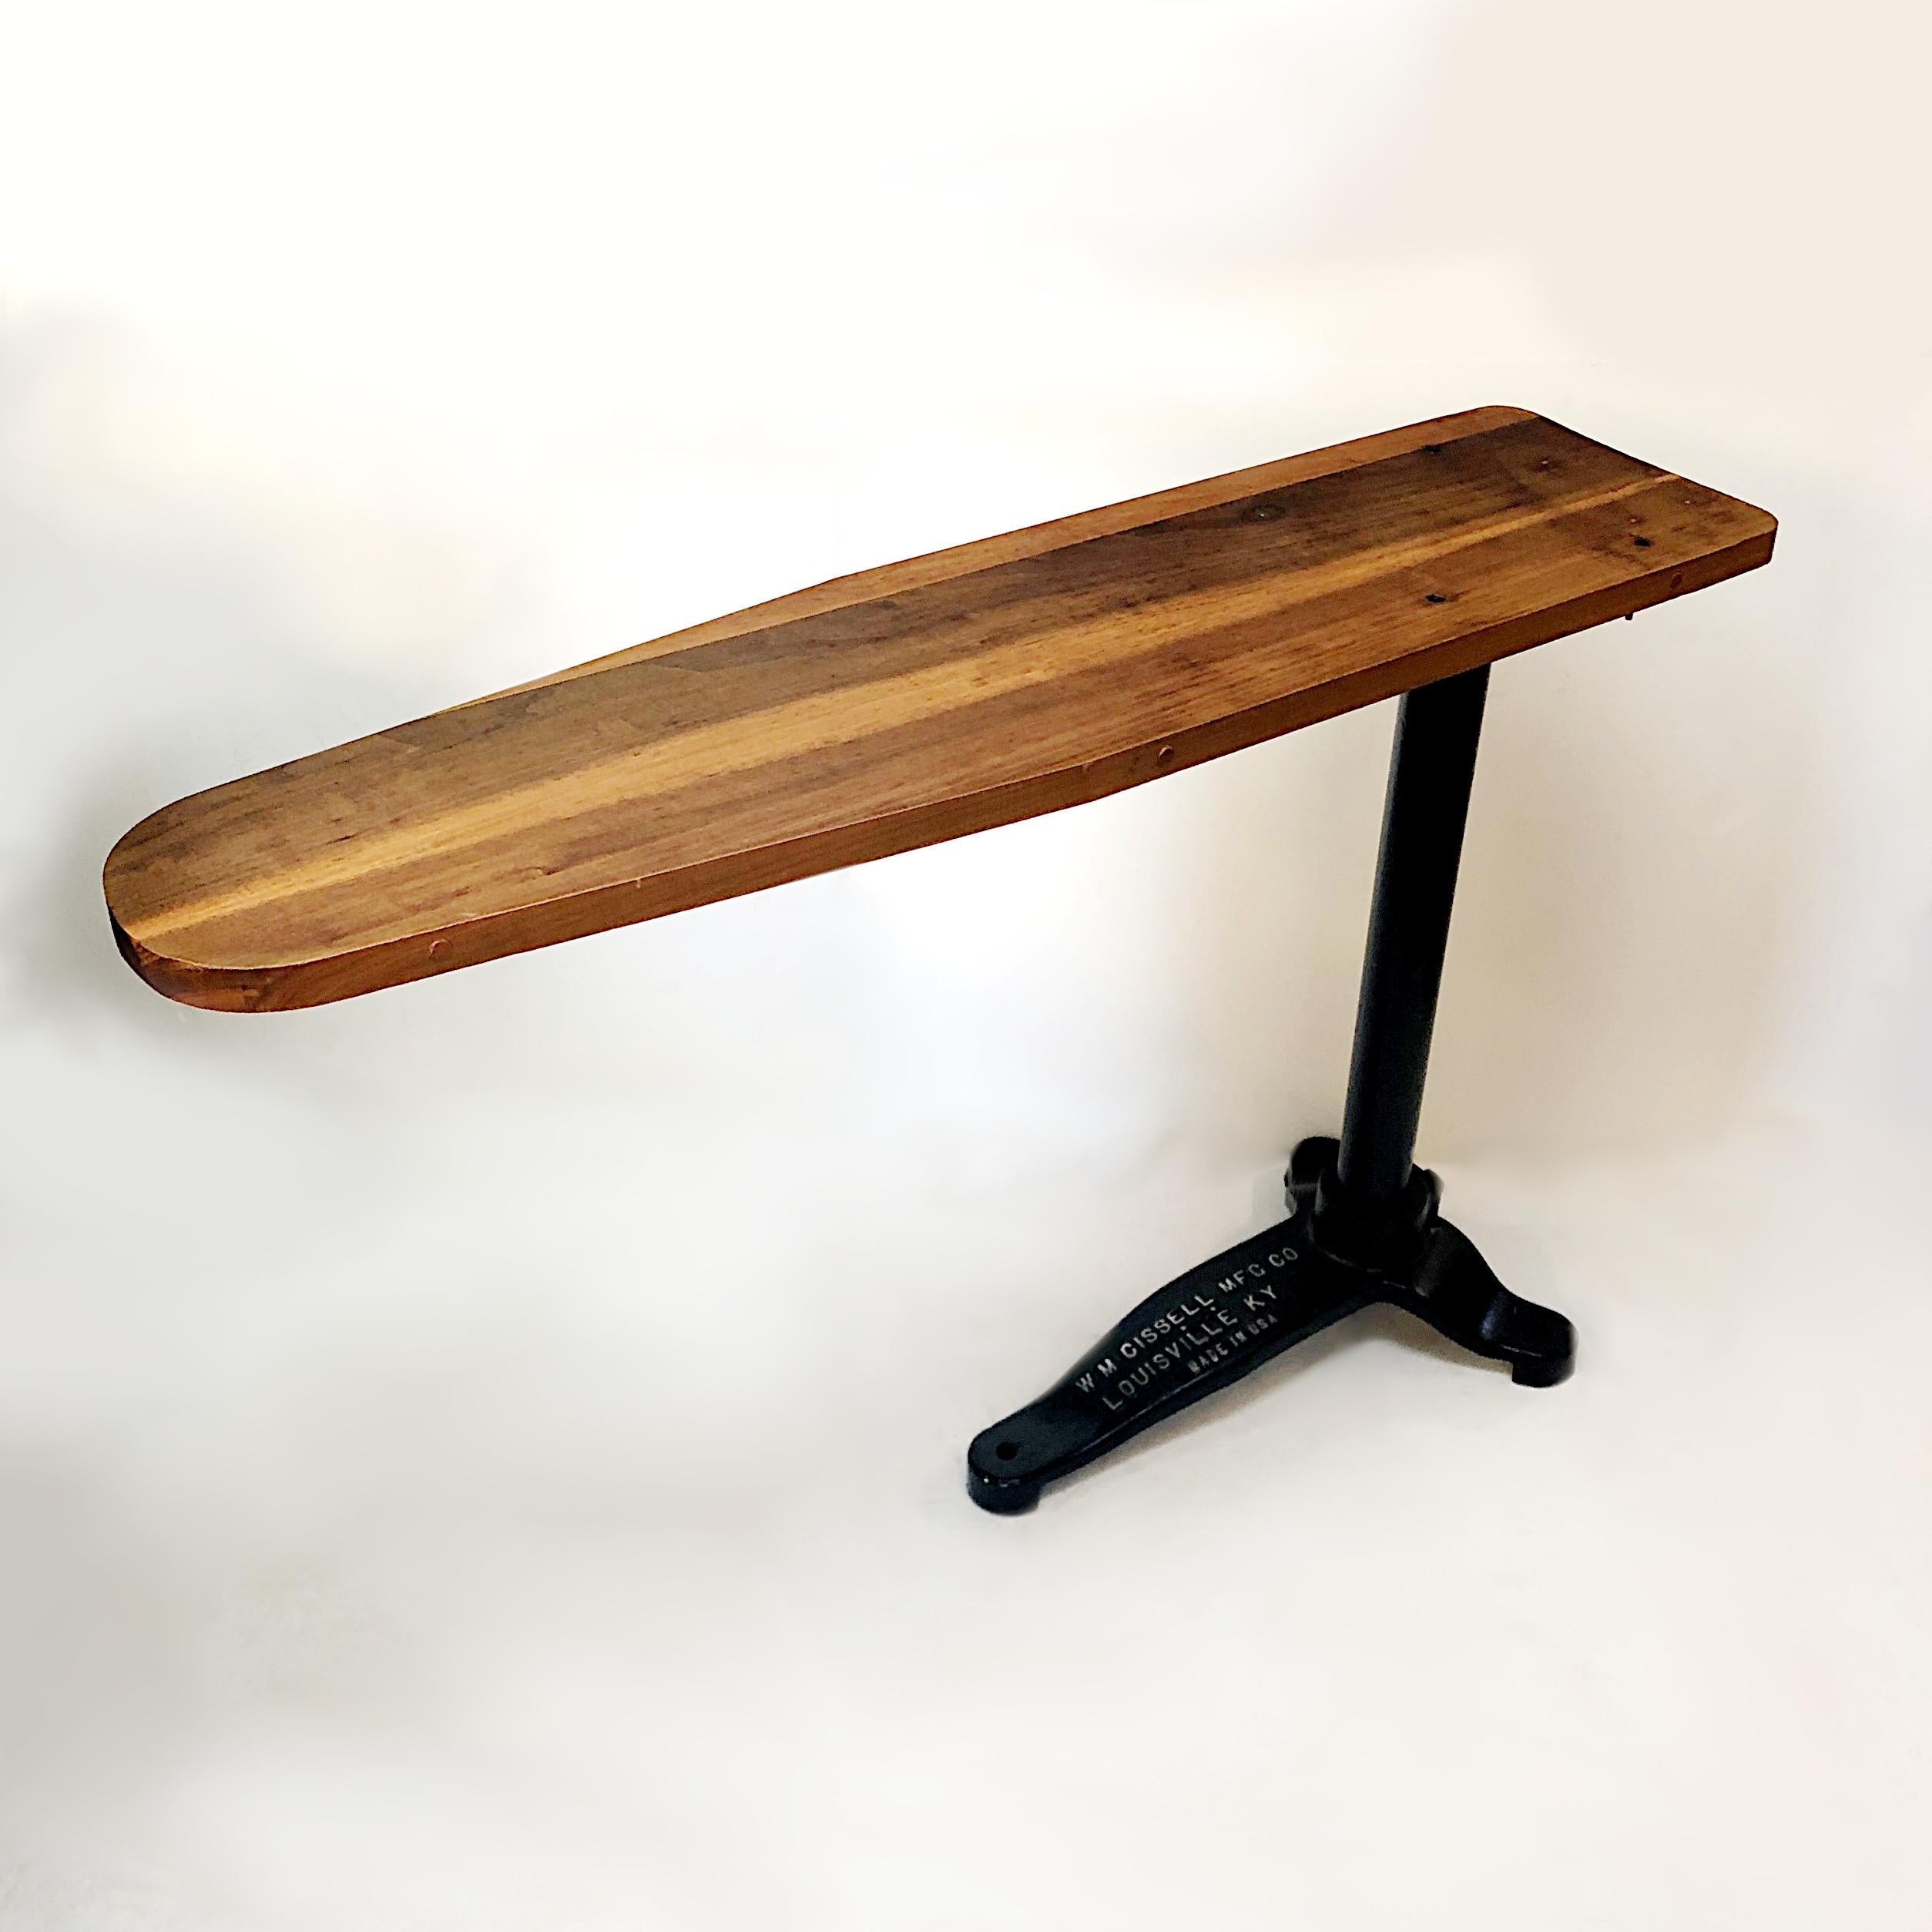 This 1930s industrial ironing board by Cissell MFG. Co. of Louisville, KY was built to last.... With its cast iron base, post, and solid wood top this piece has all the Industrial charm and makes the perfect sofa table! Great for the Louisville, KY